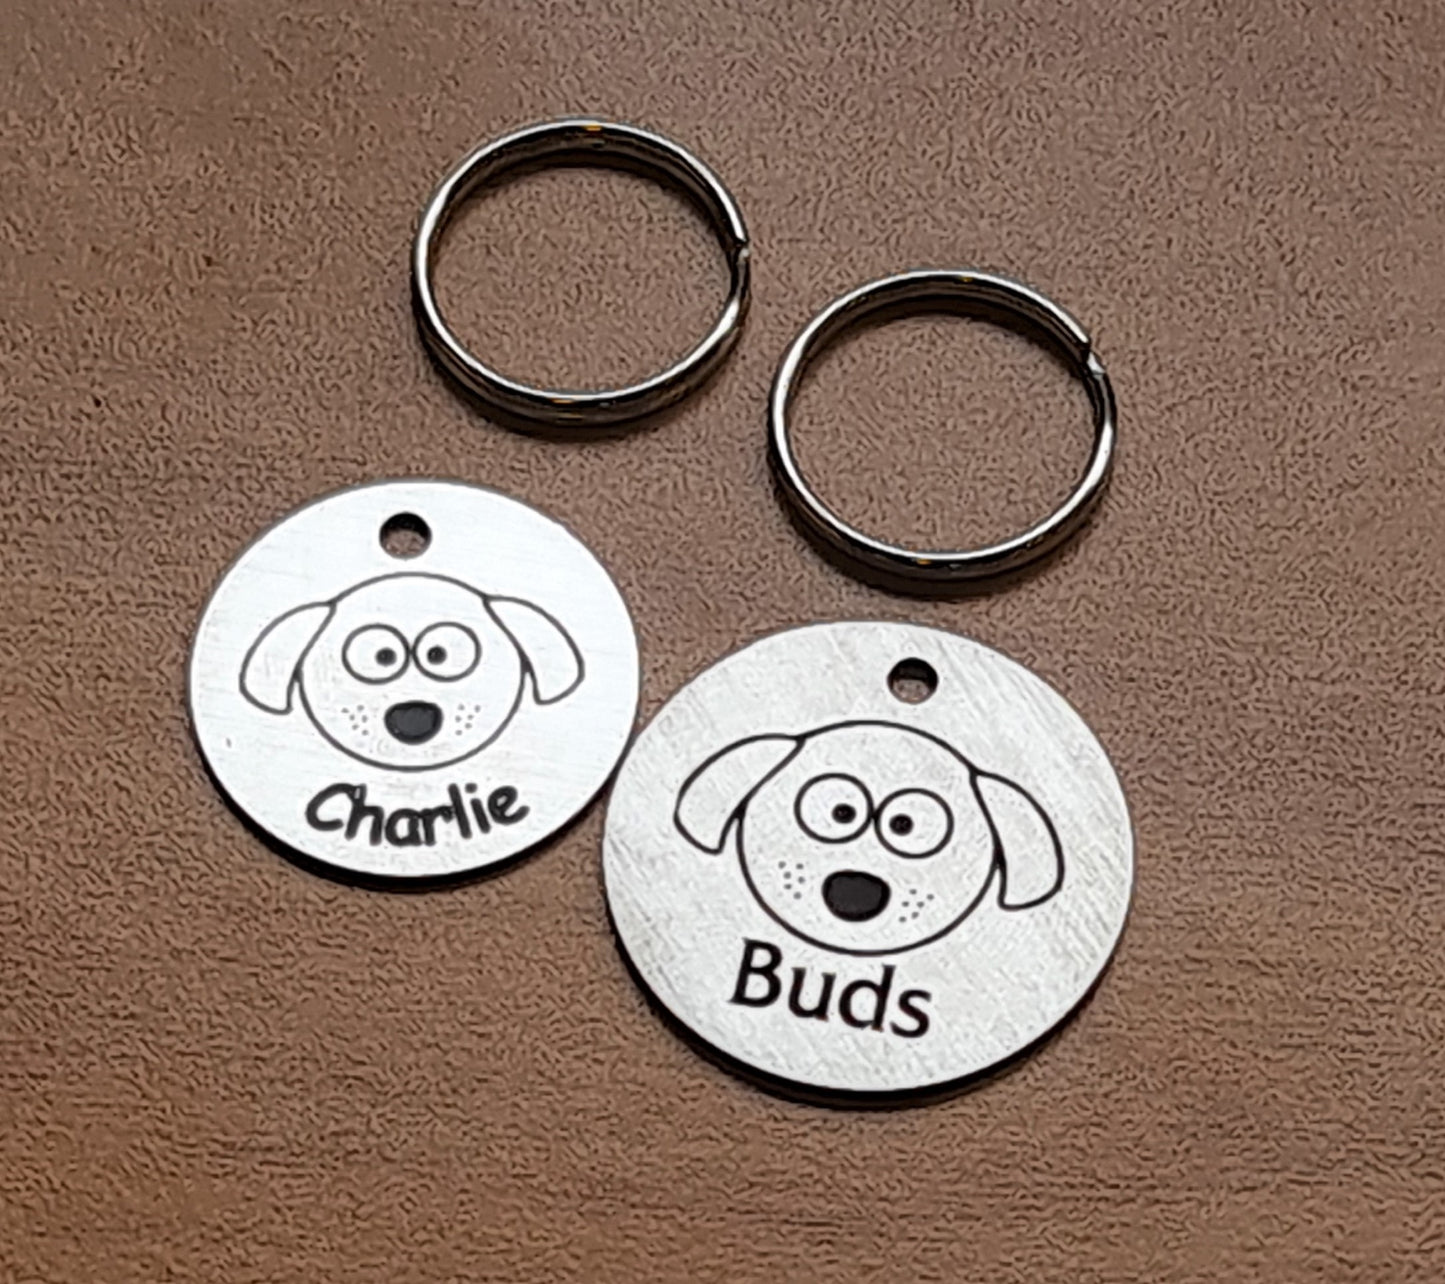 30mm Engraved Stainless Steel "Goofy" Dog Tag / ID Disc